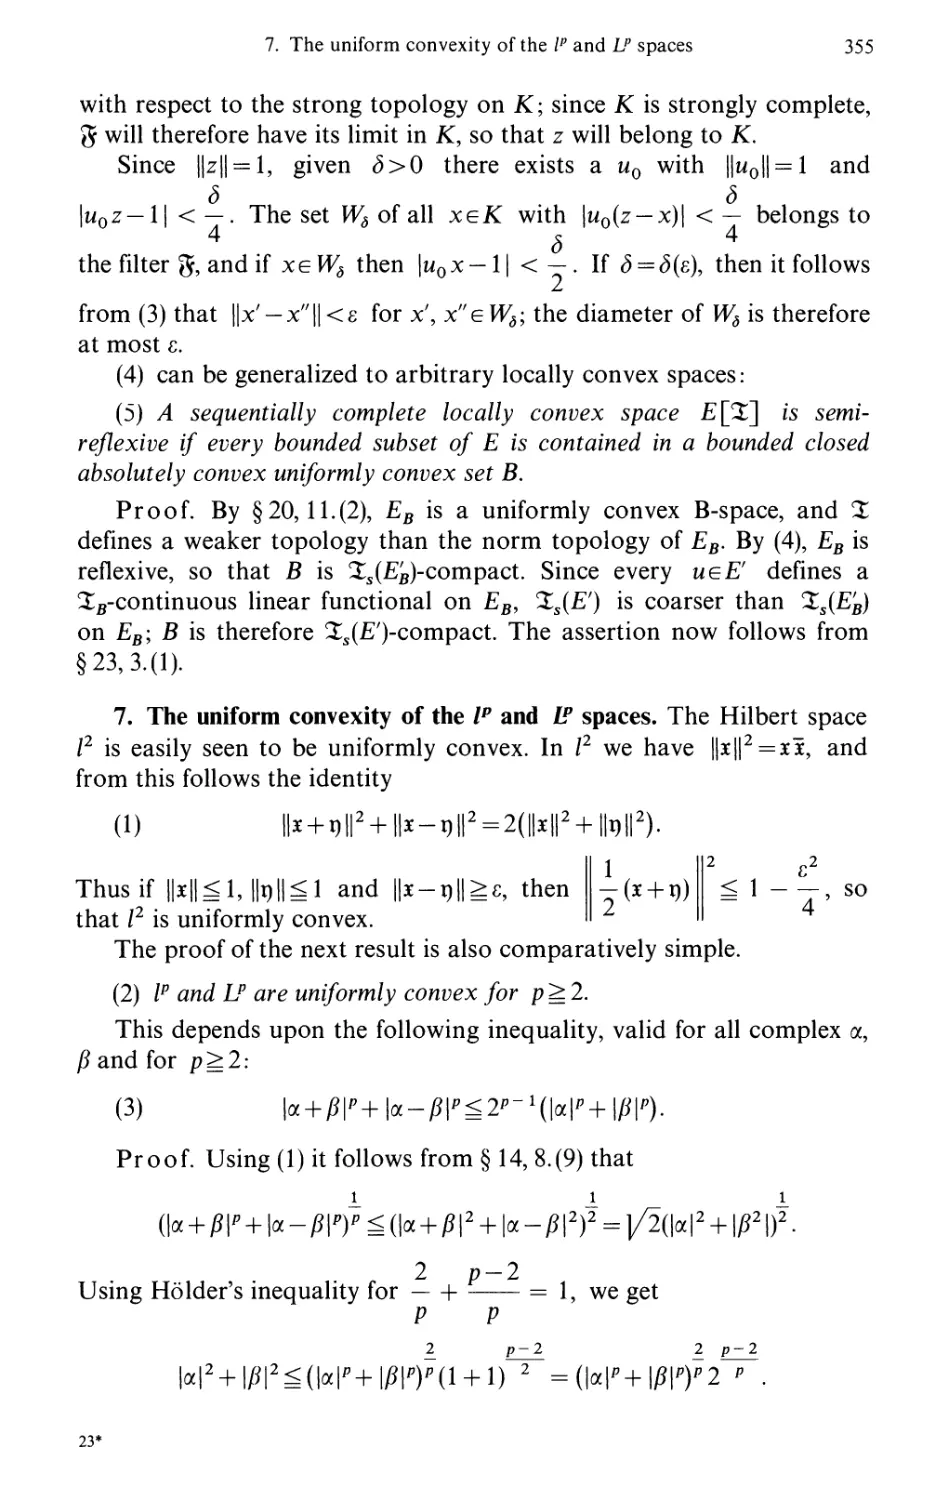 7. The uniform convexity of the lp and Lp spaces